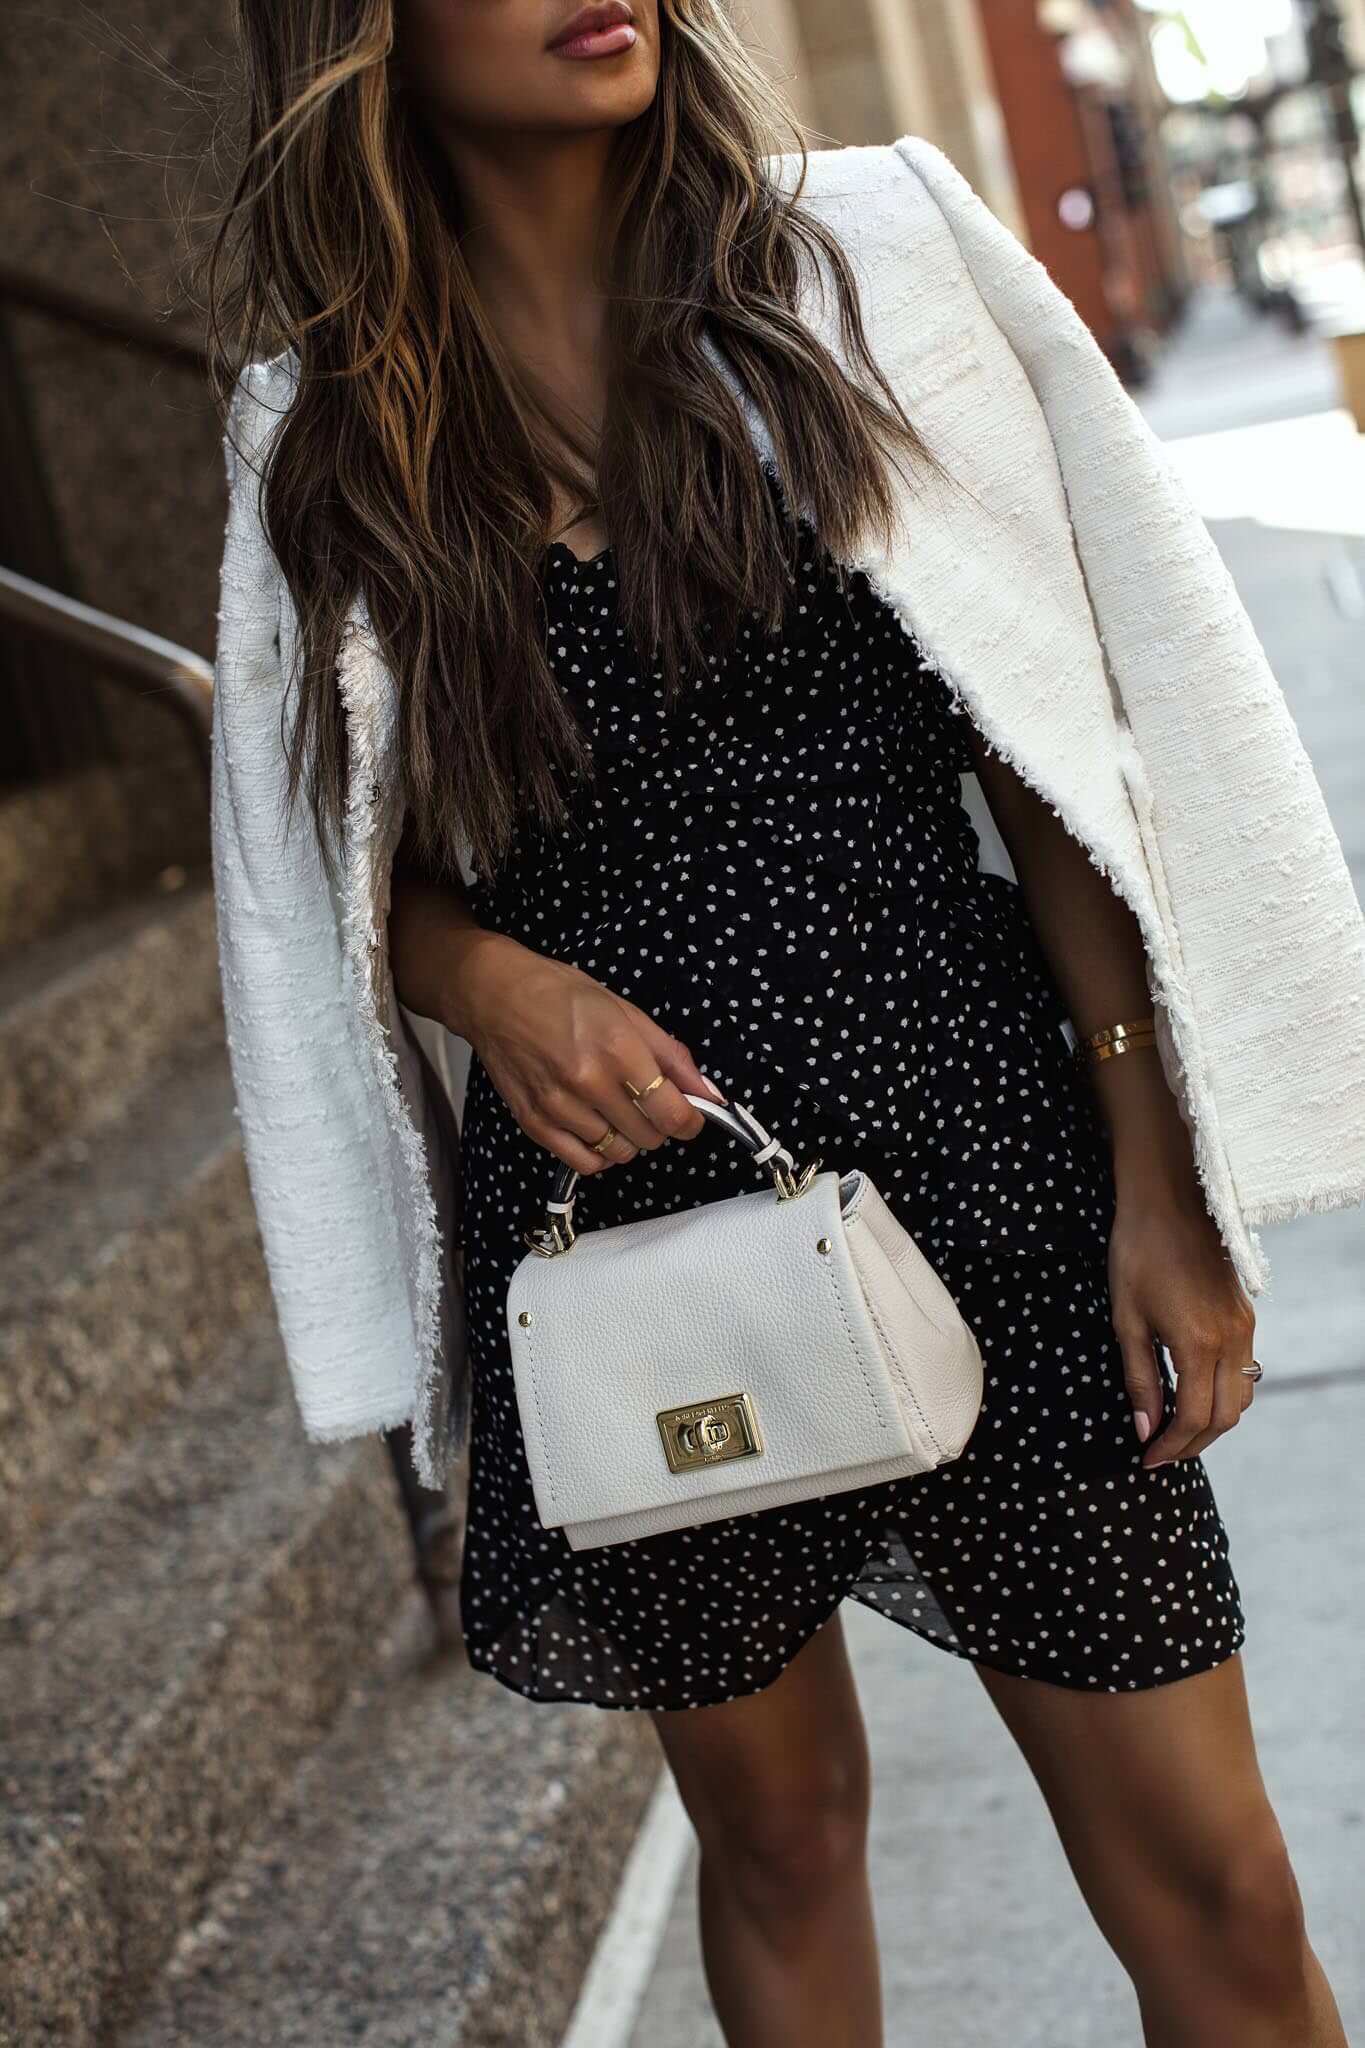 fashion blogger mia mia mine wearing a black and white dress from saks off 5th